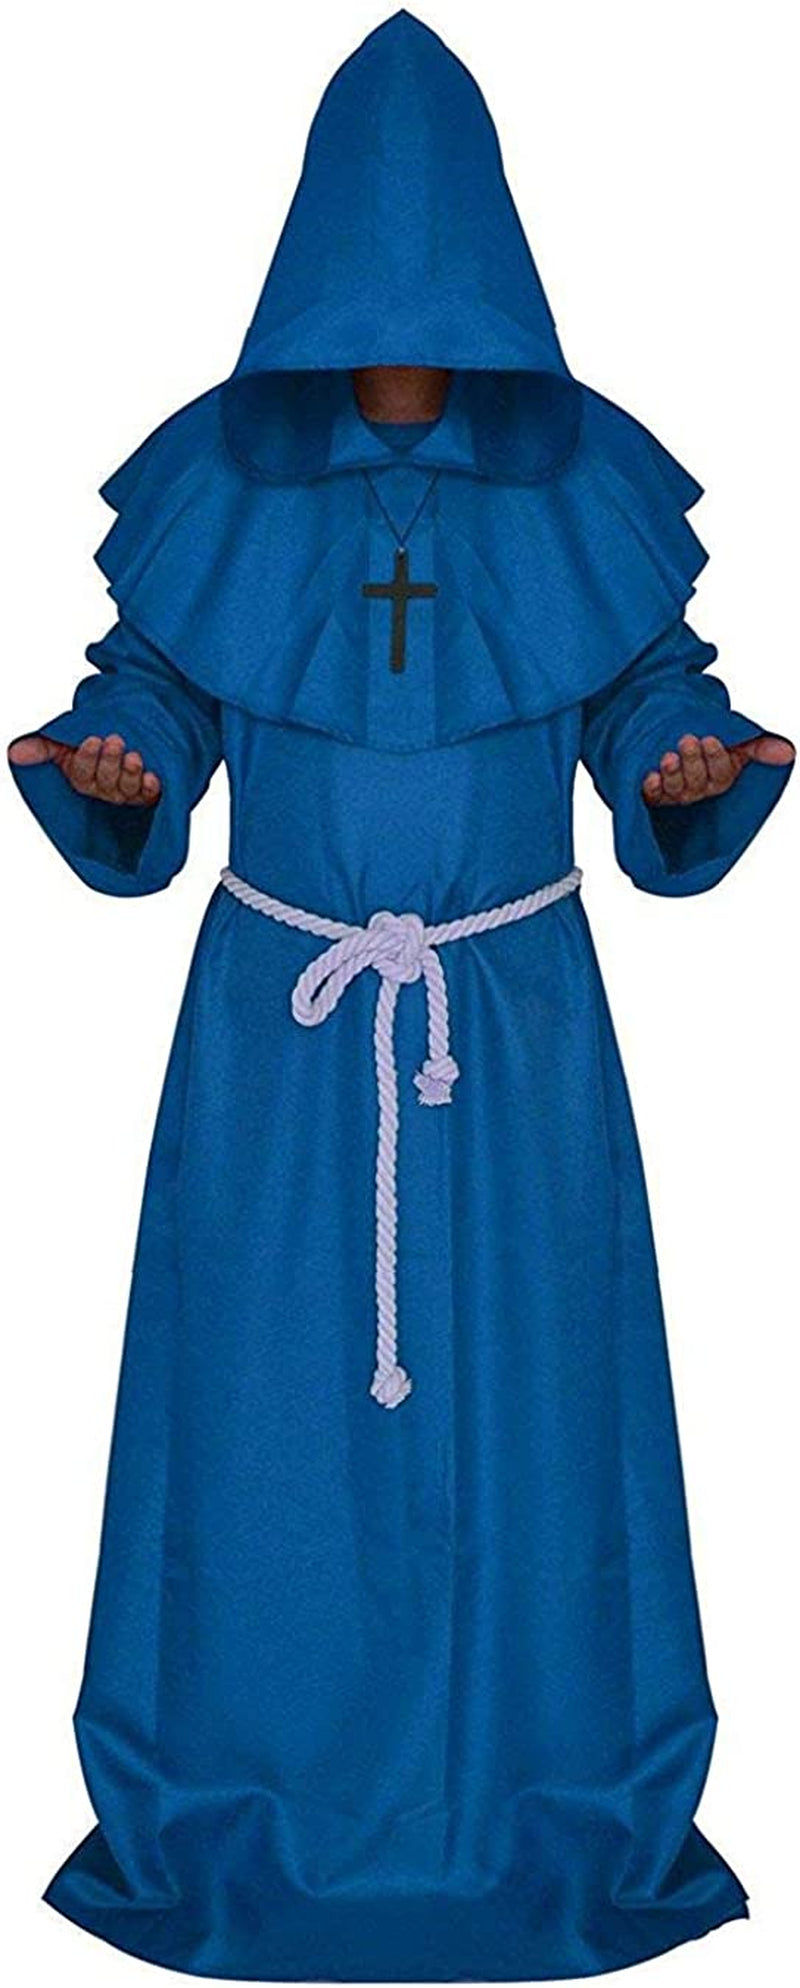 LHJ Friar Medieval Hooded Monk Renaissance Priest Robe Costume Cosplay  LHJ Blue Small 